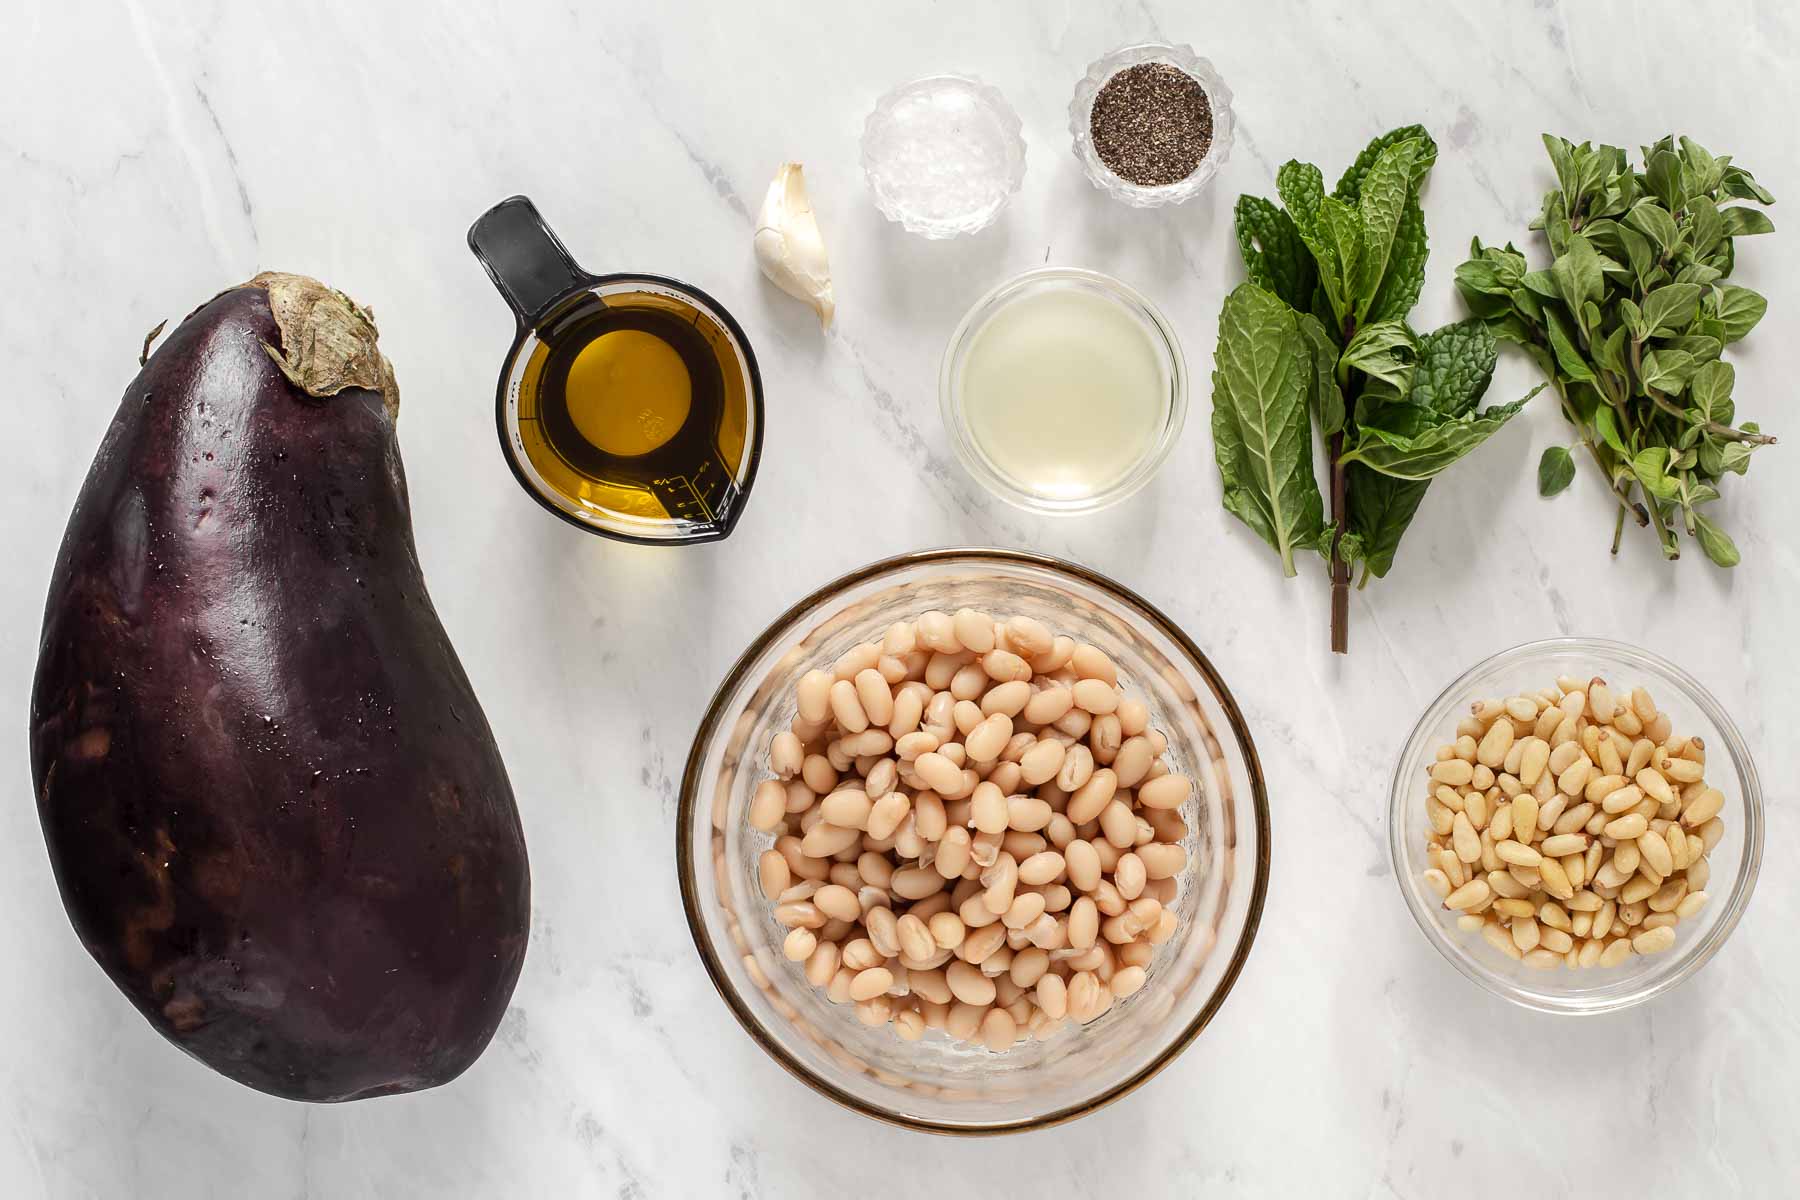 Eggplant, white beans, fresh herbs and pine nuts on marble counter.